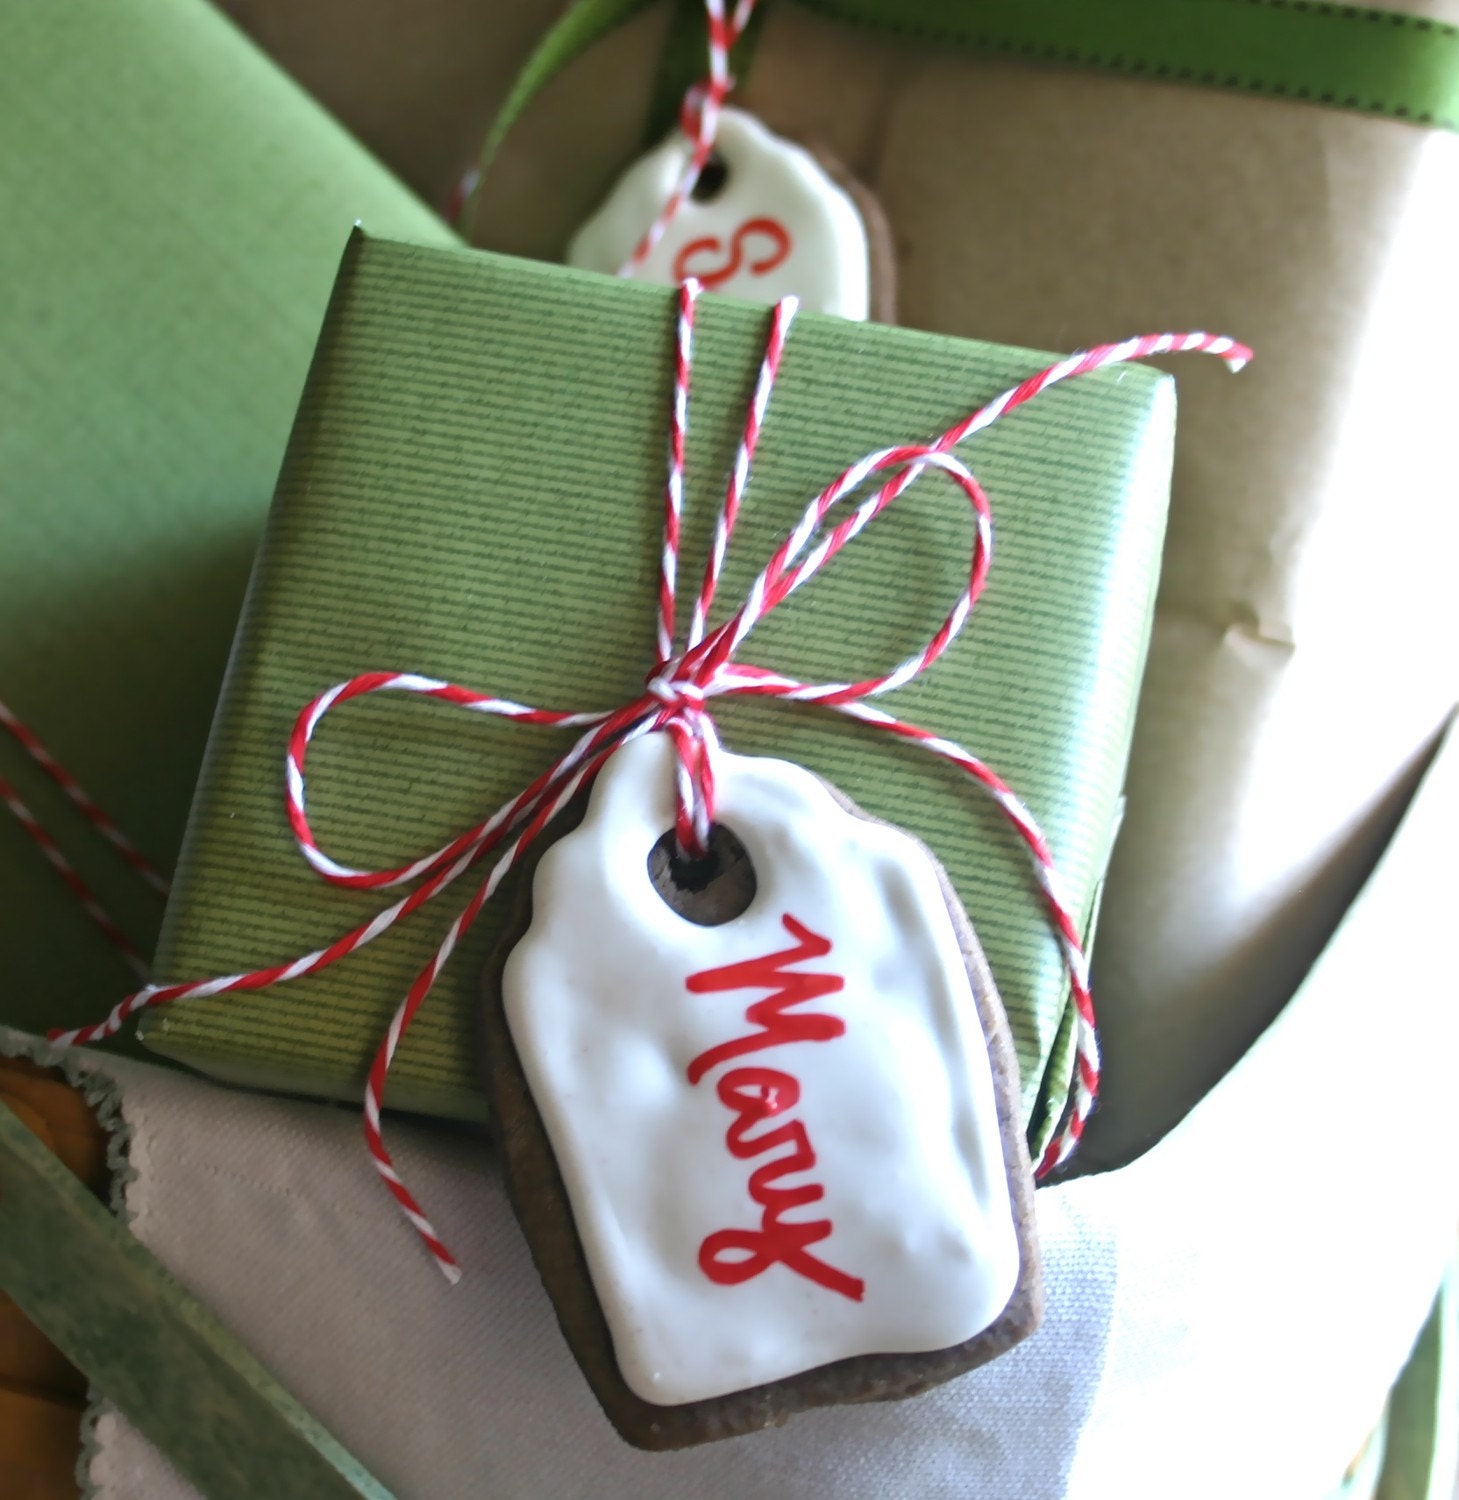 5 Organic Gingerbread Gift Tags with Edible Ink Writer PRE-ORDER BY 1ST WEEK OF DEC.